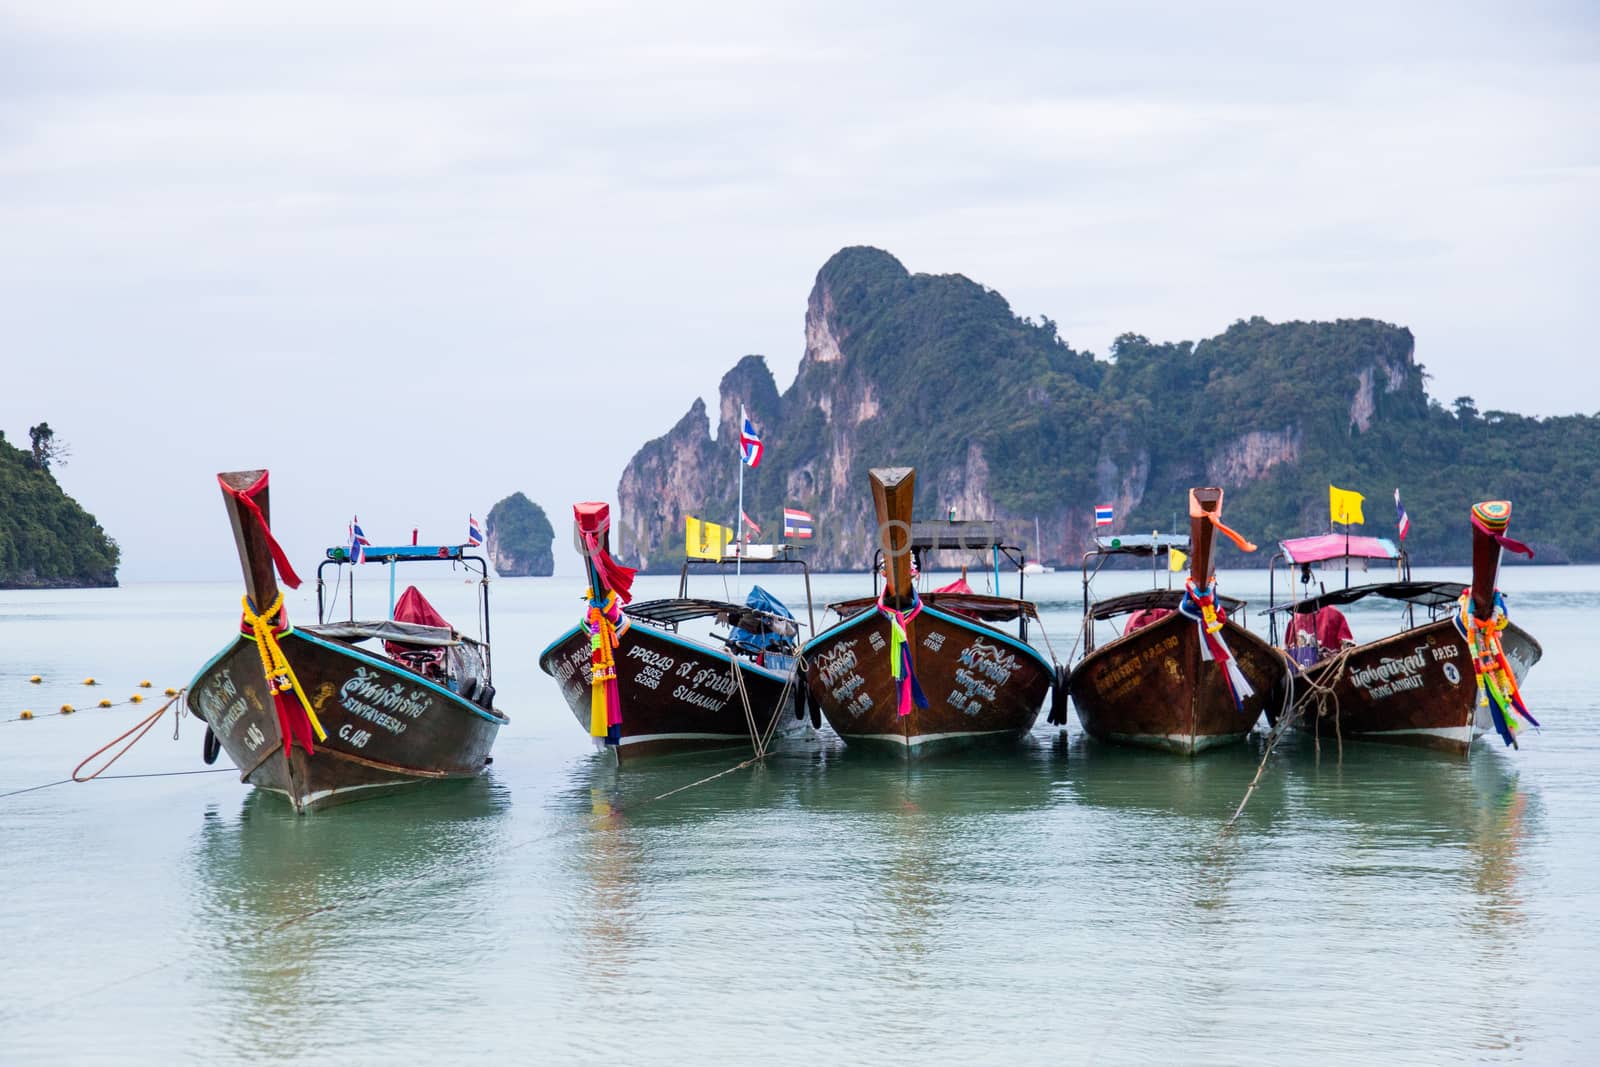 Phi Phi Thailand 12.6.2015 fishing boats in the bay with hills in the background by kgboxford